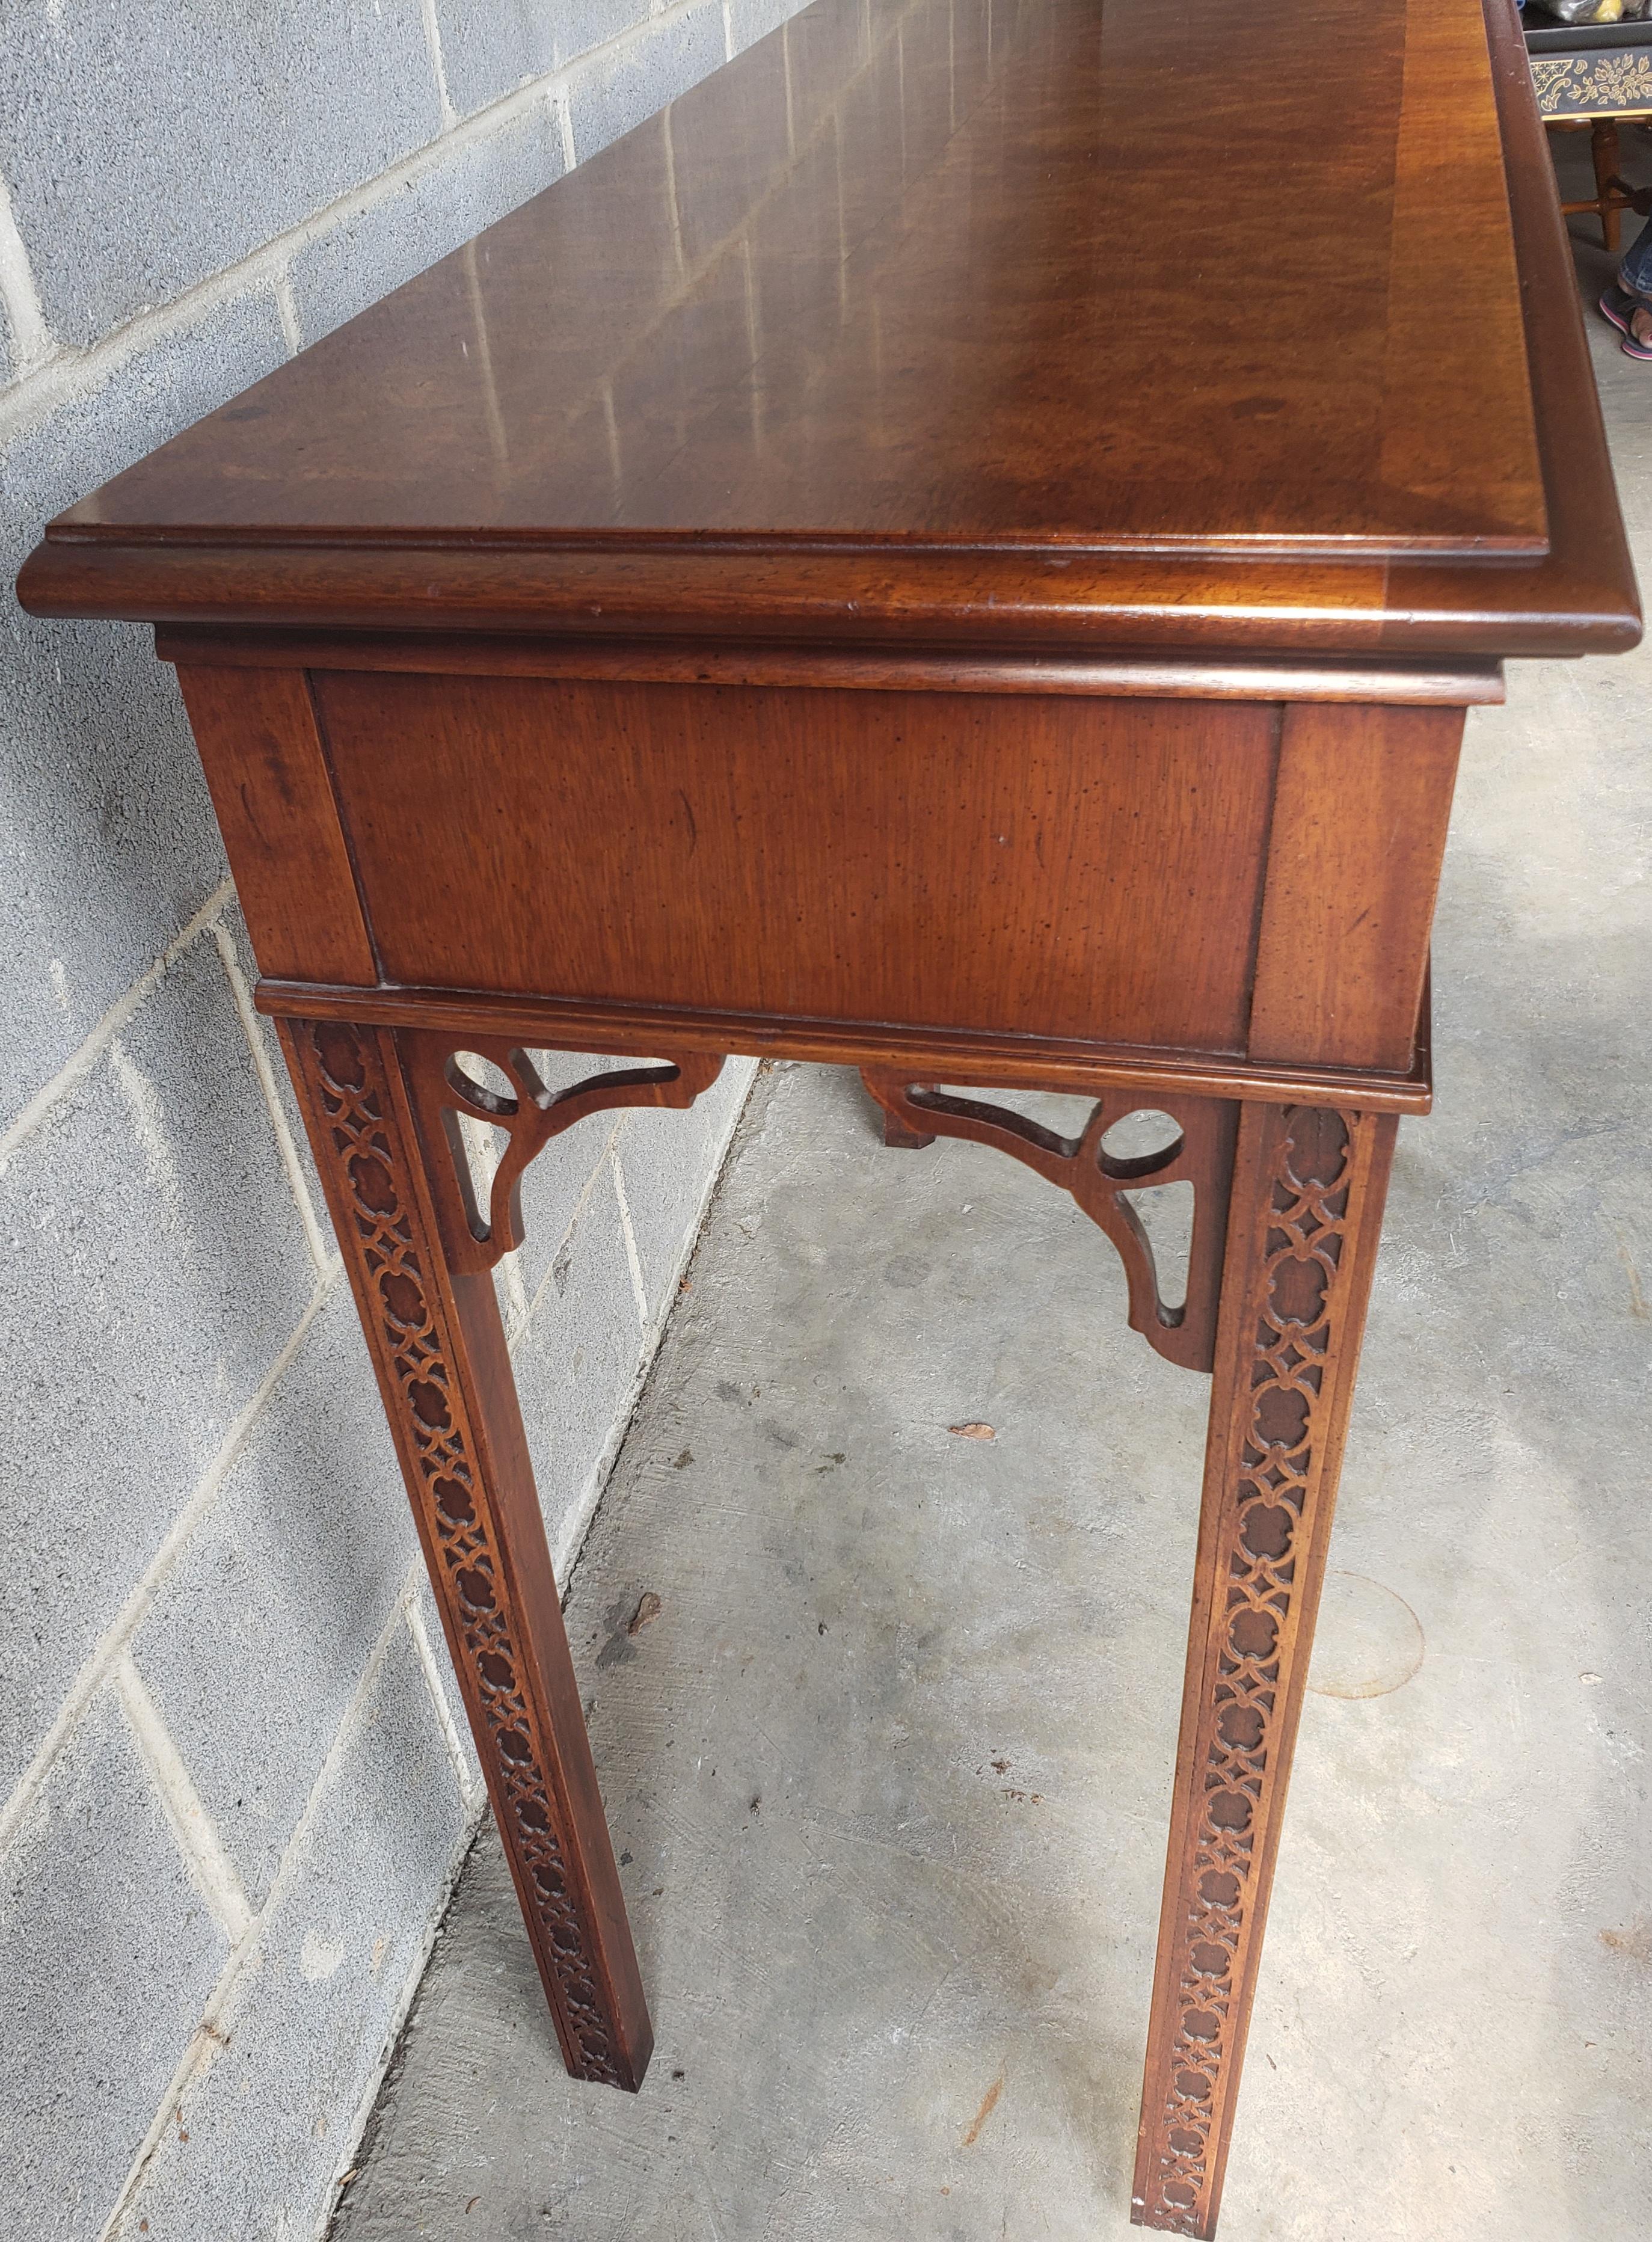 1970s Chippendale Walnut Burl Console Table with Fretwork and Banded Top In Excellent Condition For Sale In Germantown, MD